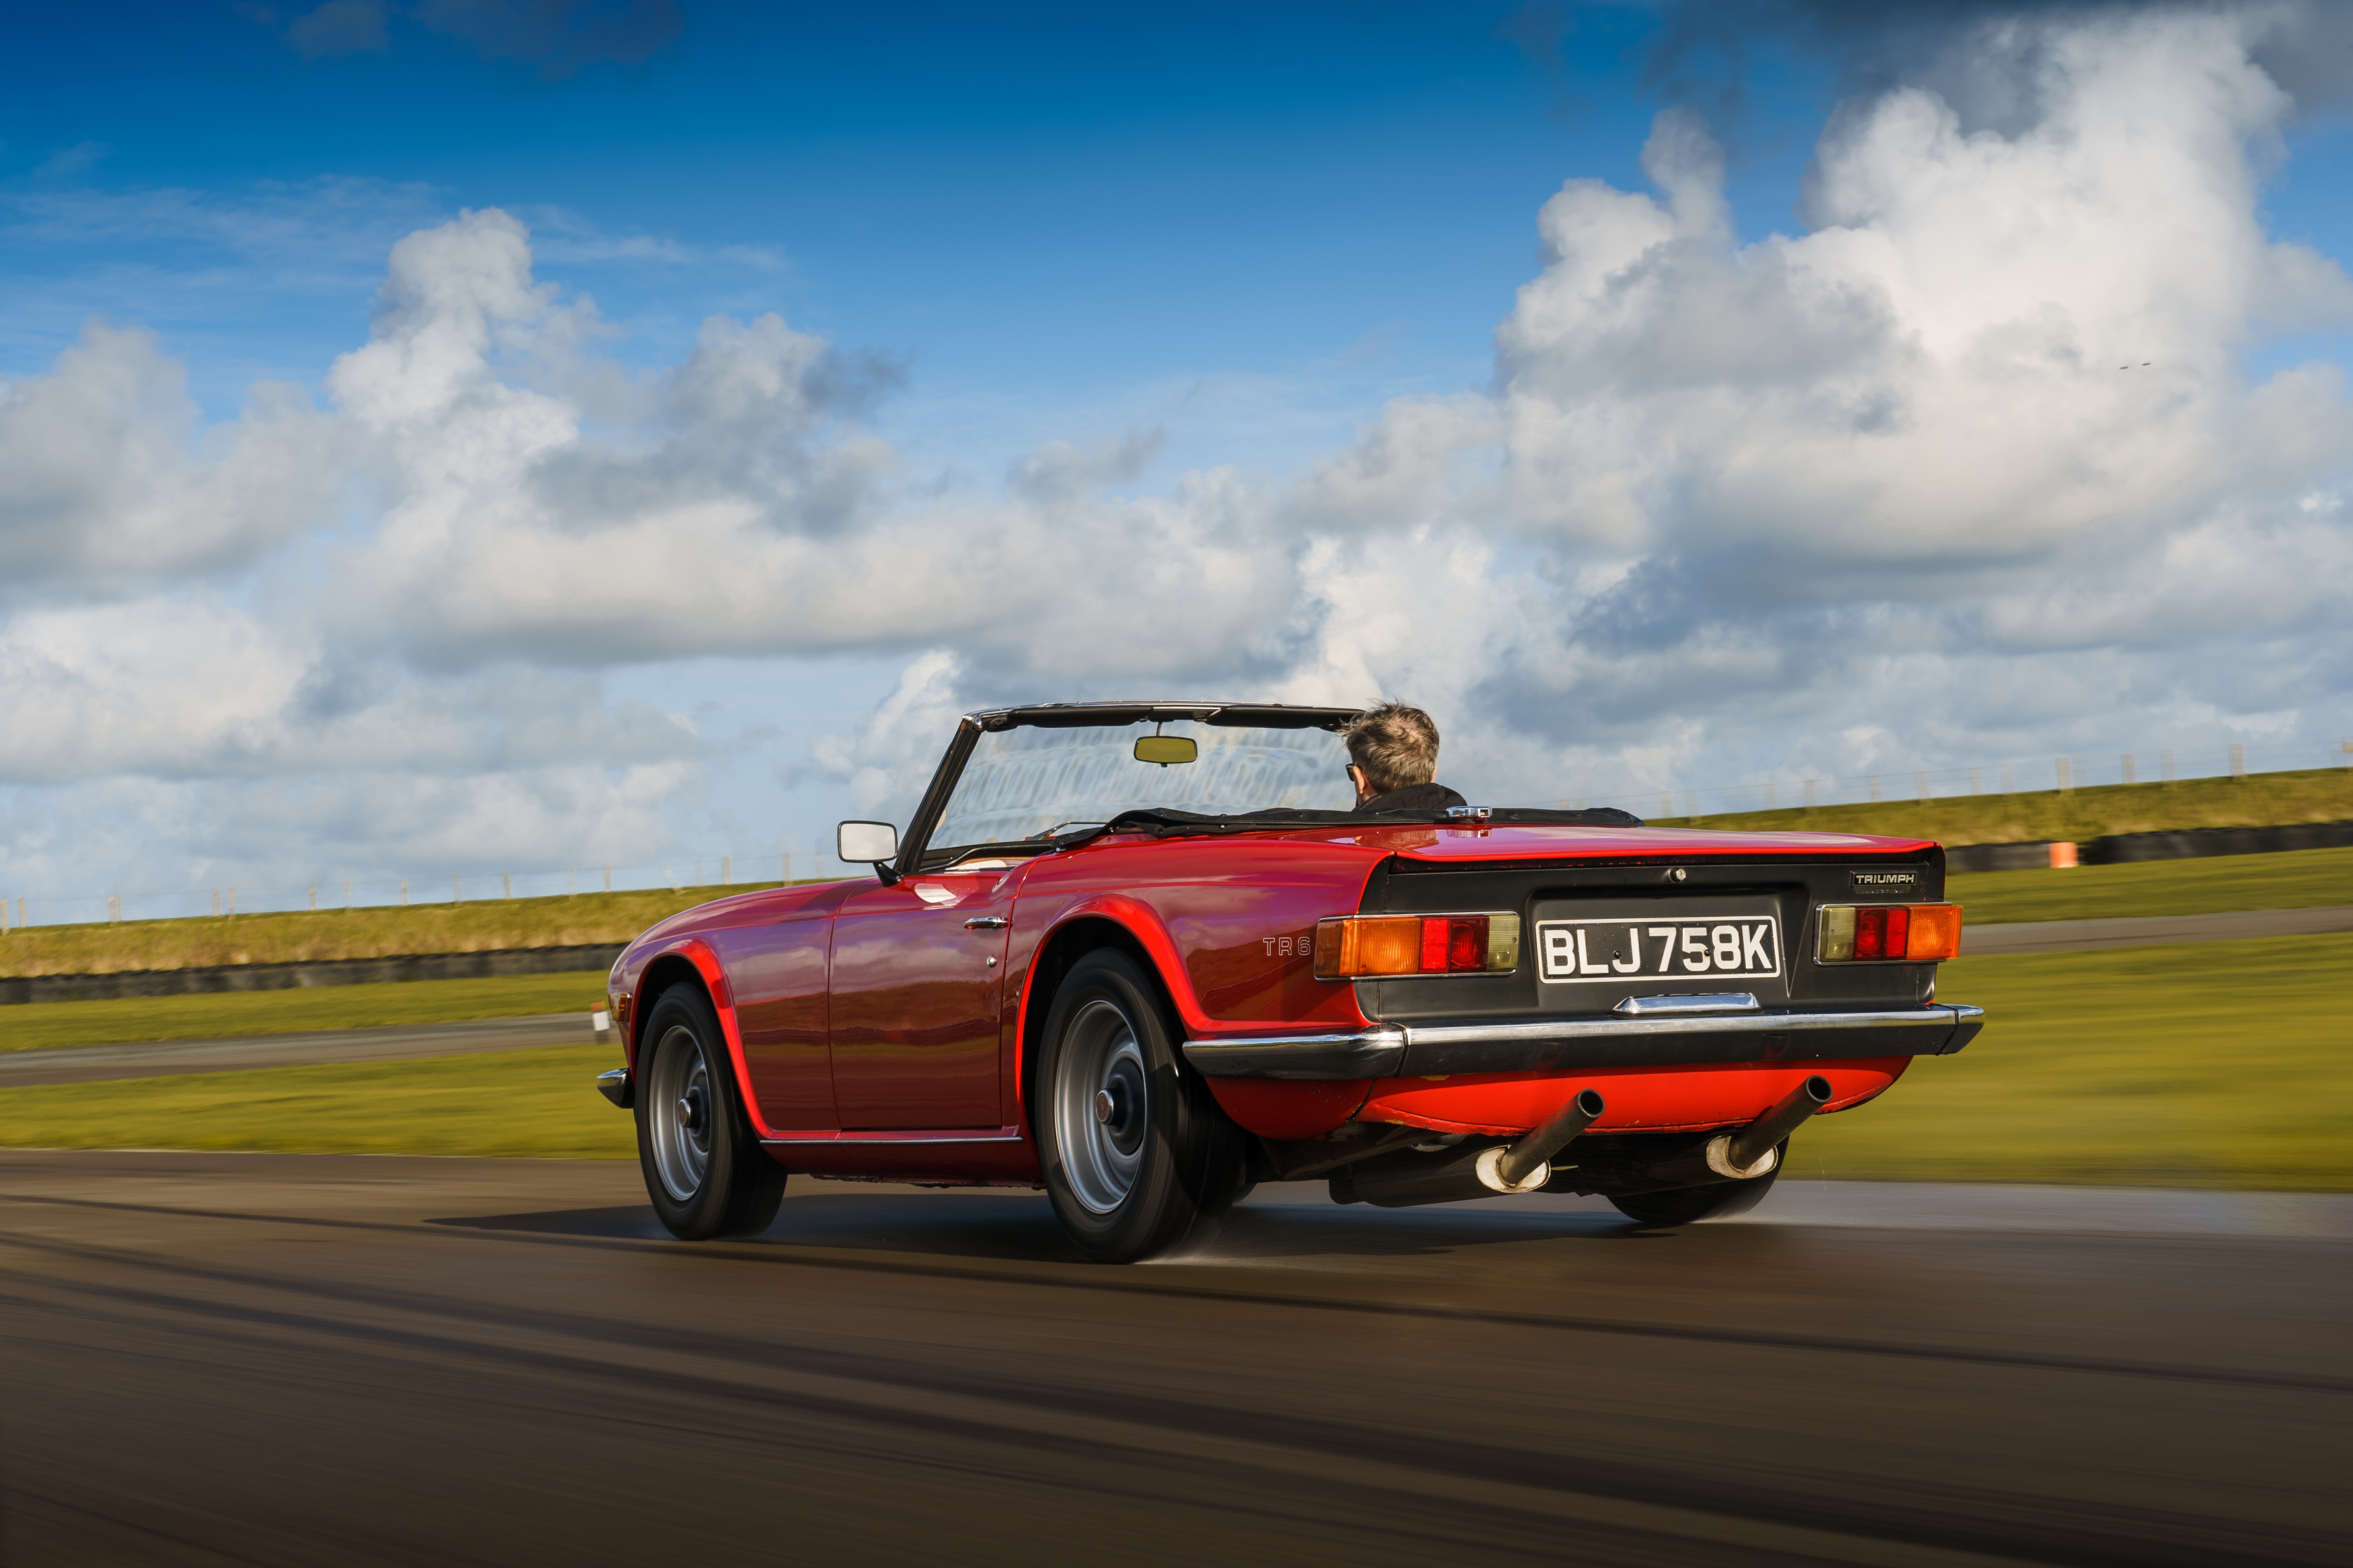 Drive-It Day, the national UK celebration of classic cars and its impact on the industry